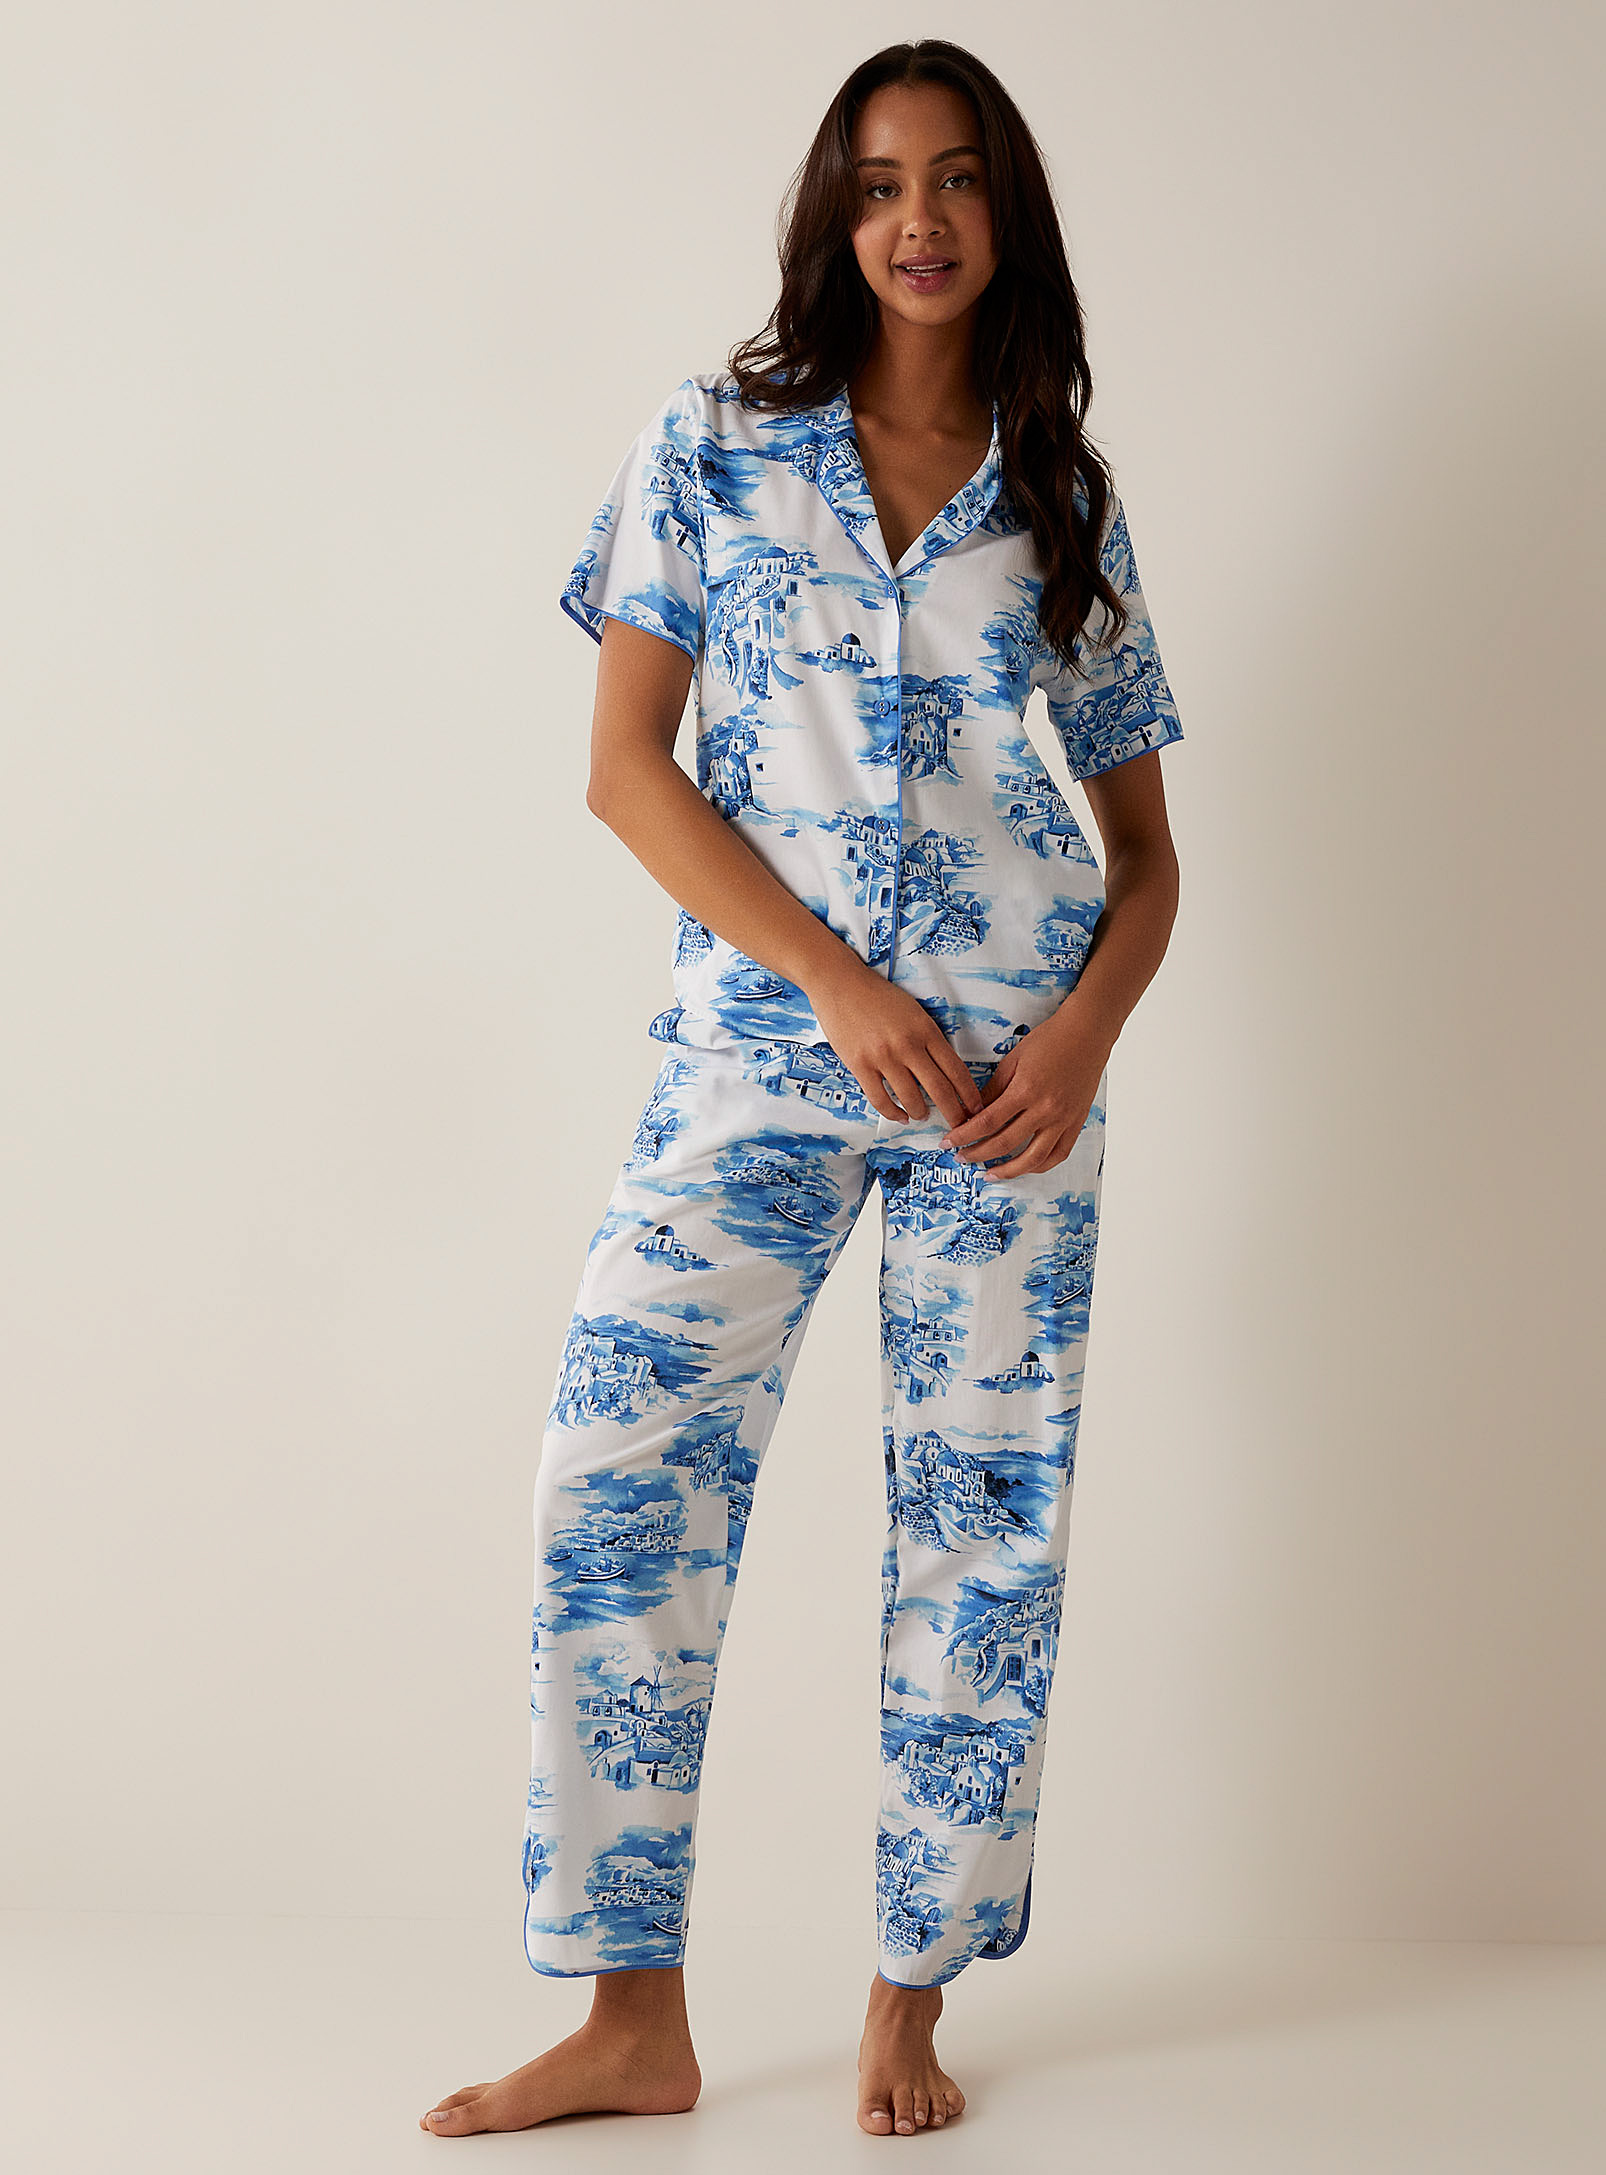 Cyberjammies Santorin Blue-and-white Lounge Pant